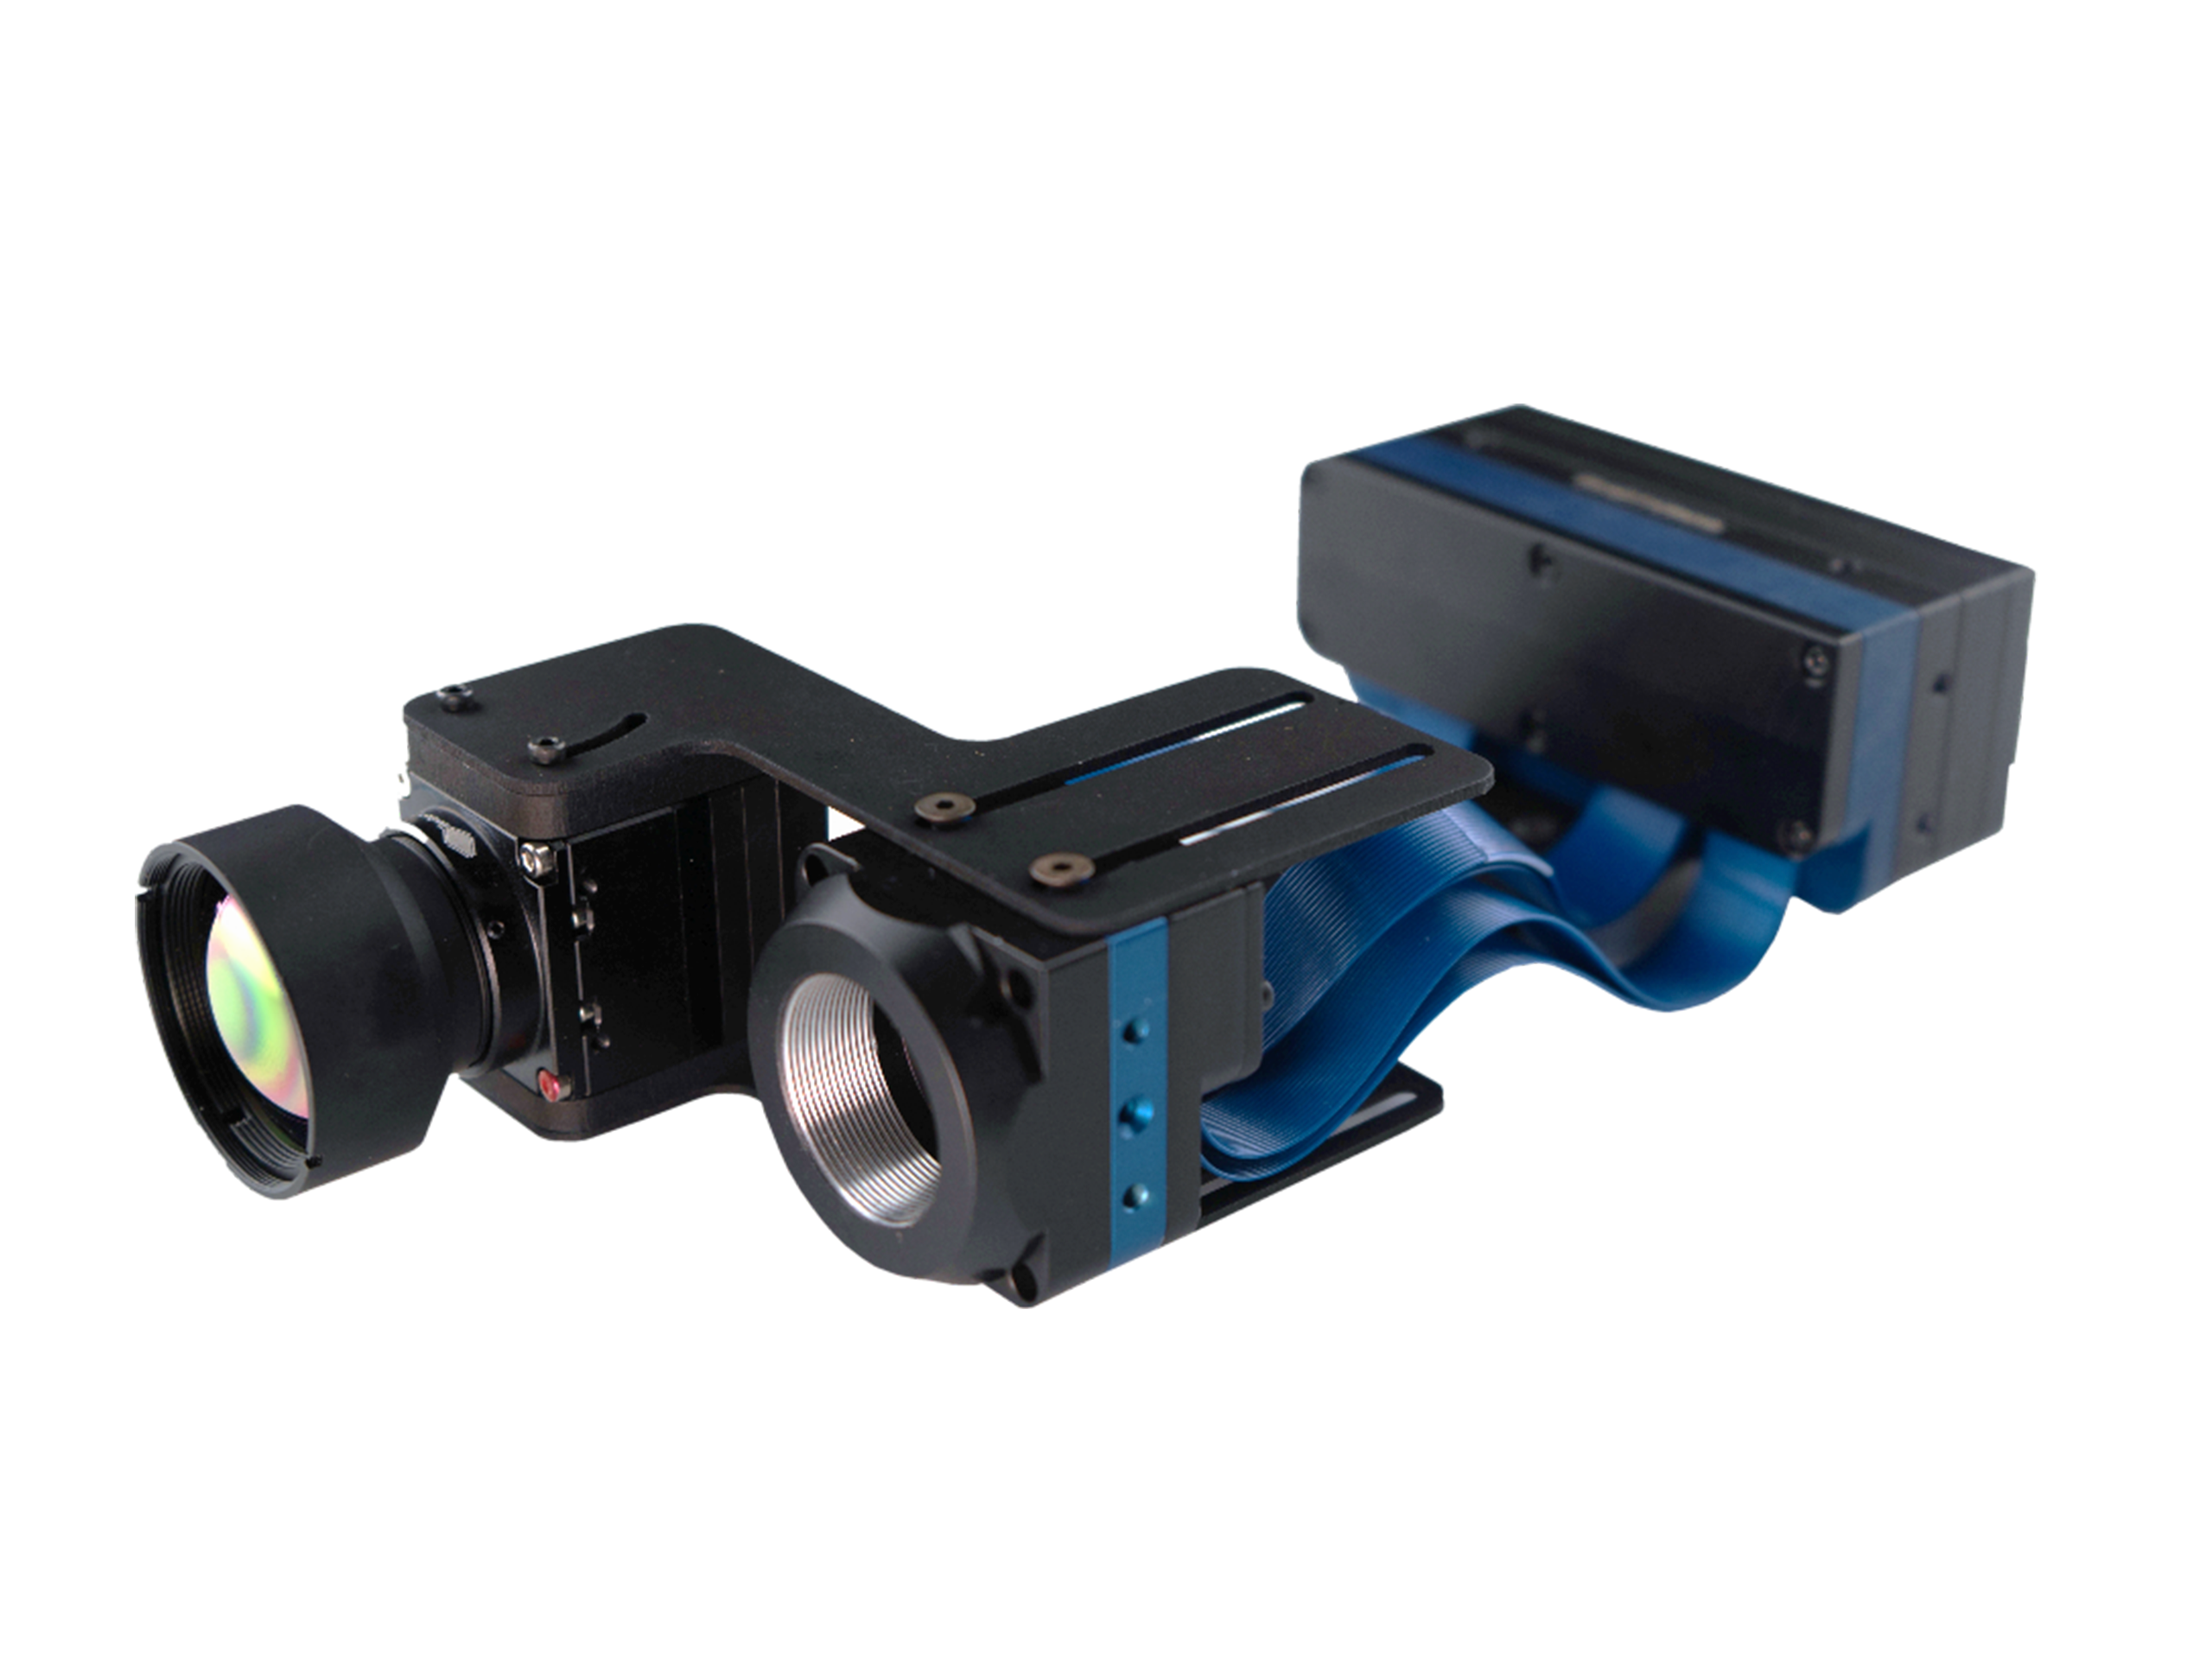 HYBRID the enhanced fusion camera cores platform for handheld equipment and vehicles